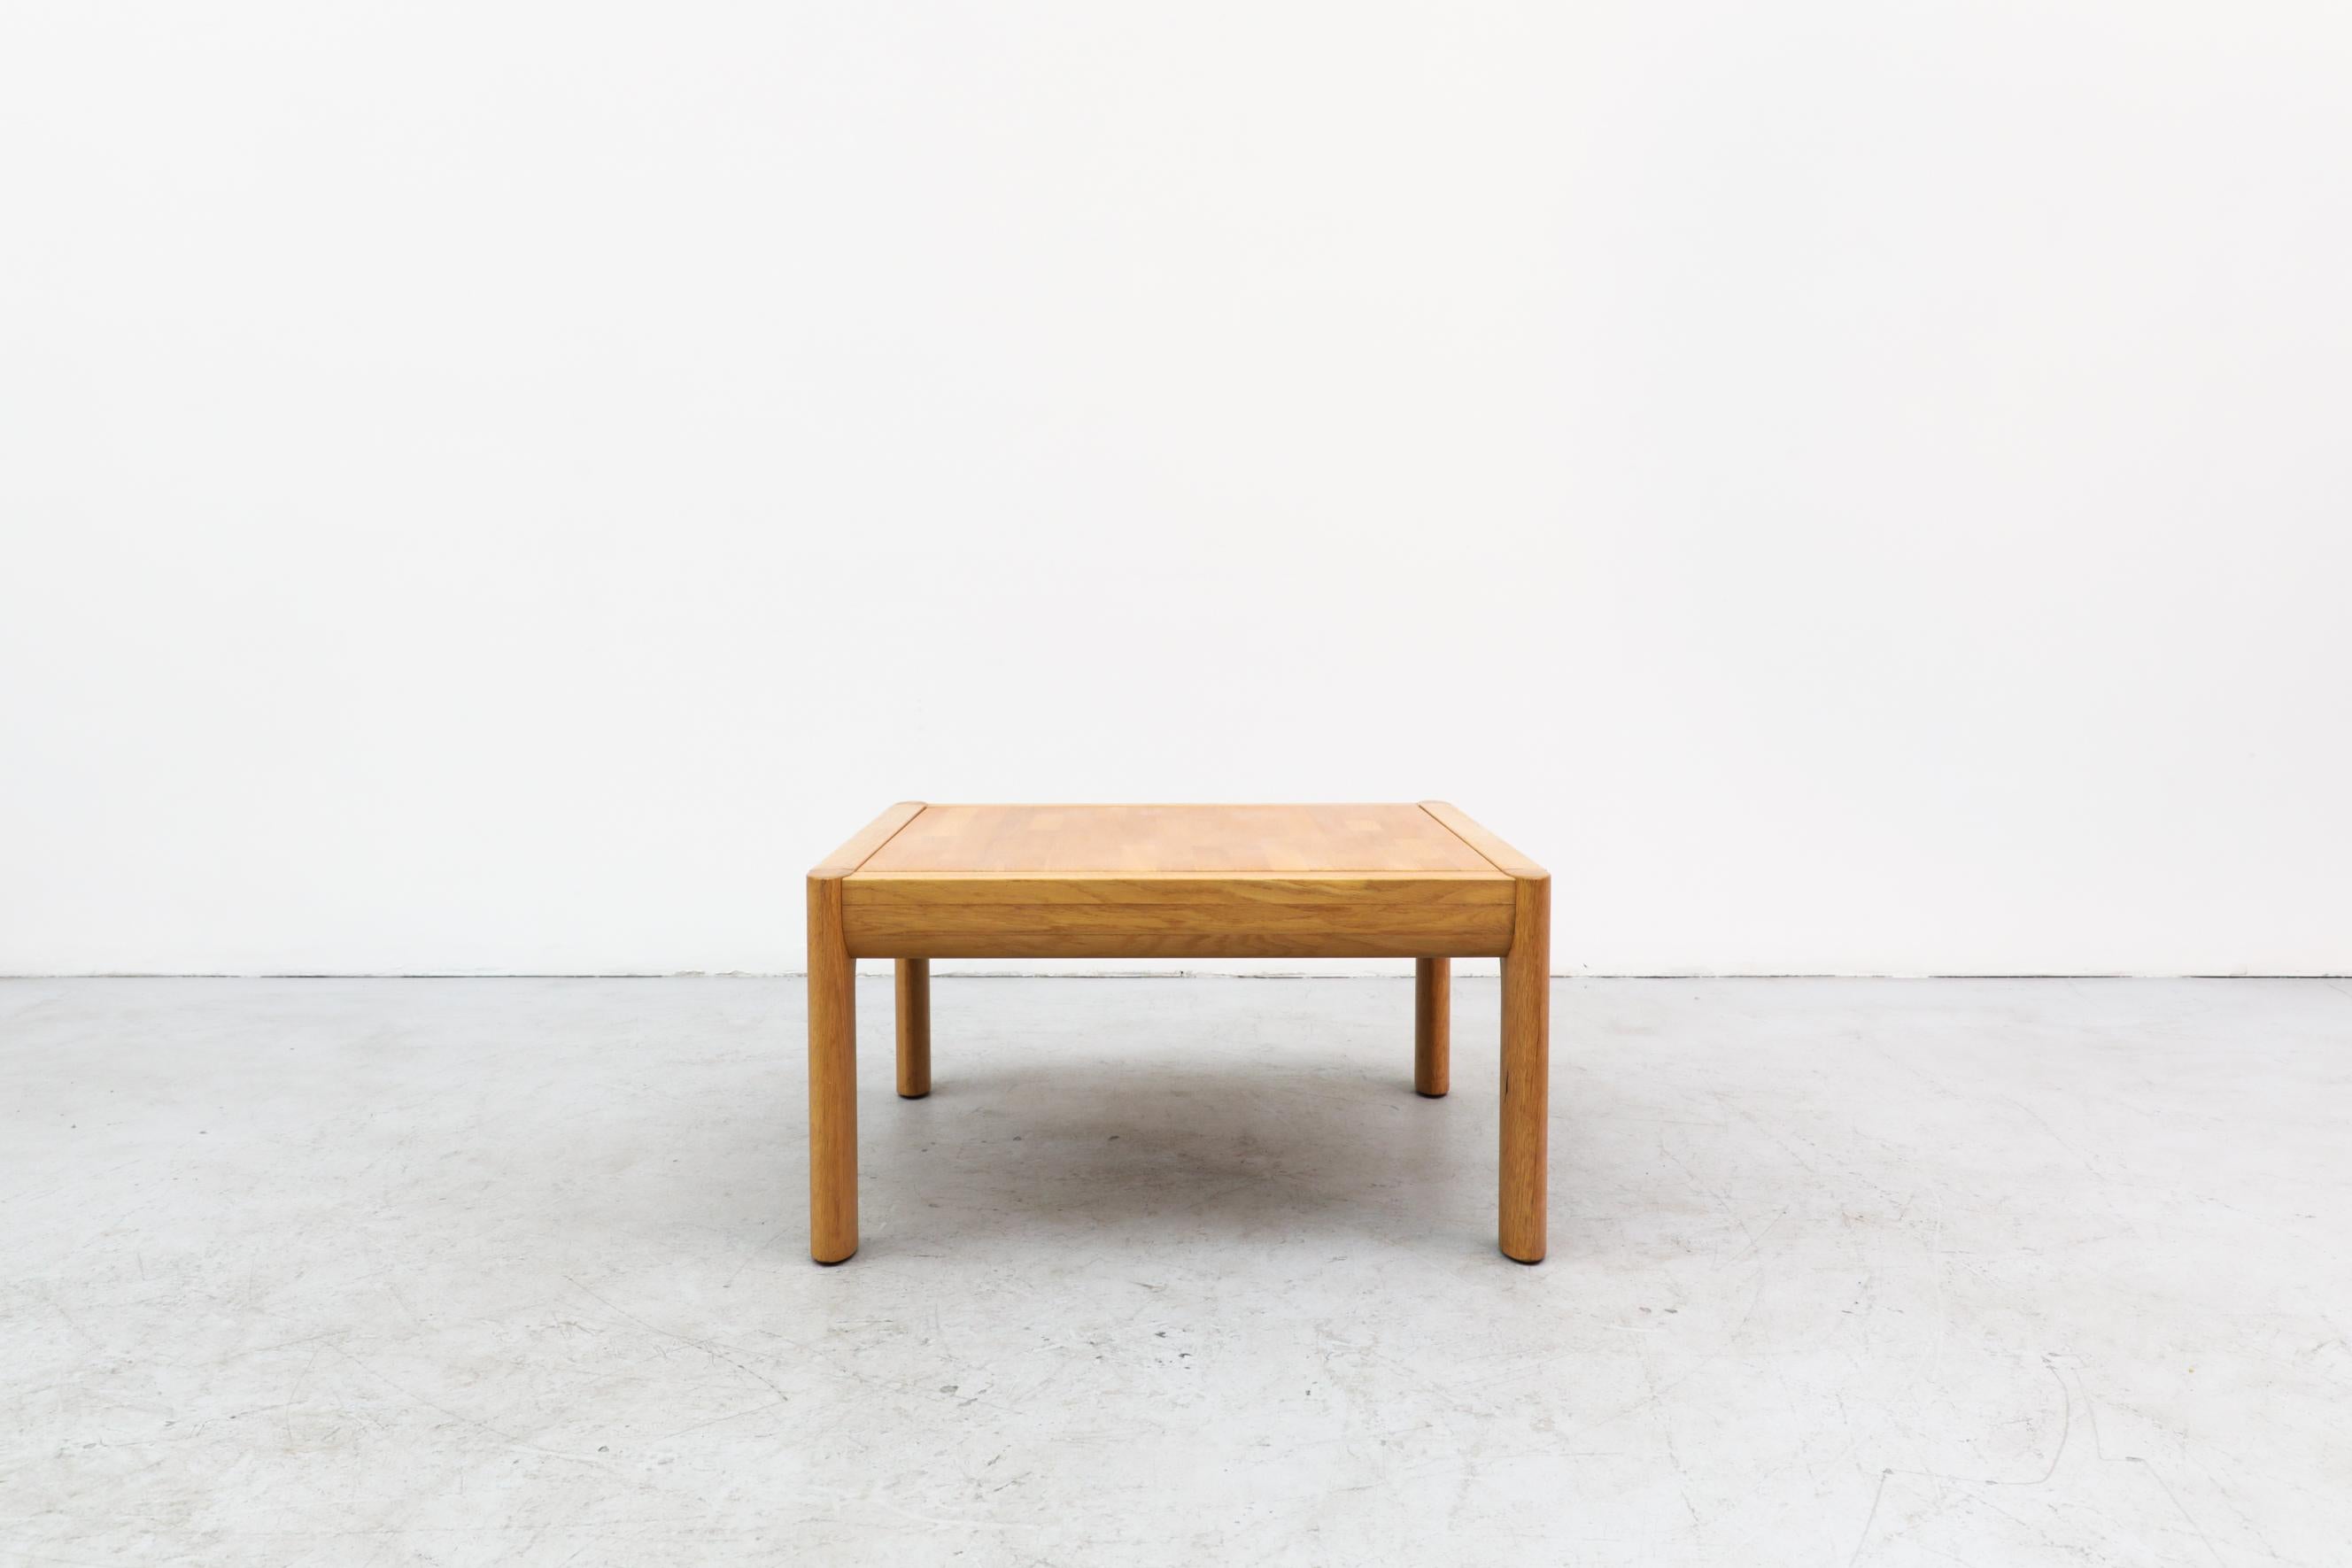 Simple 1970's square oak coffee table with inset top by Finnish design company, Asko. In good original condition with wear consistent with its age and use.